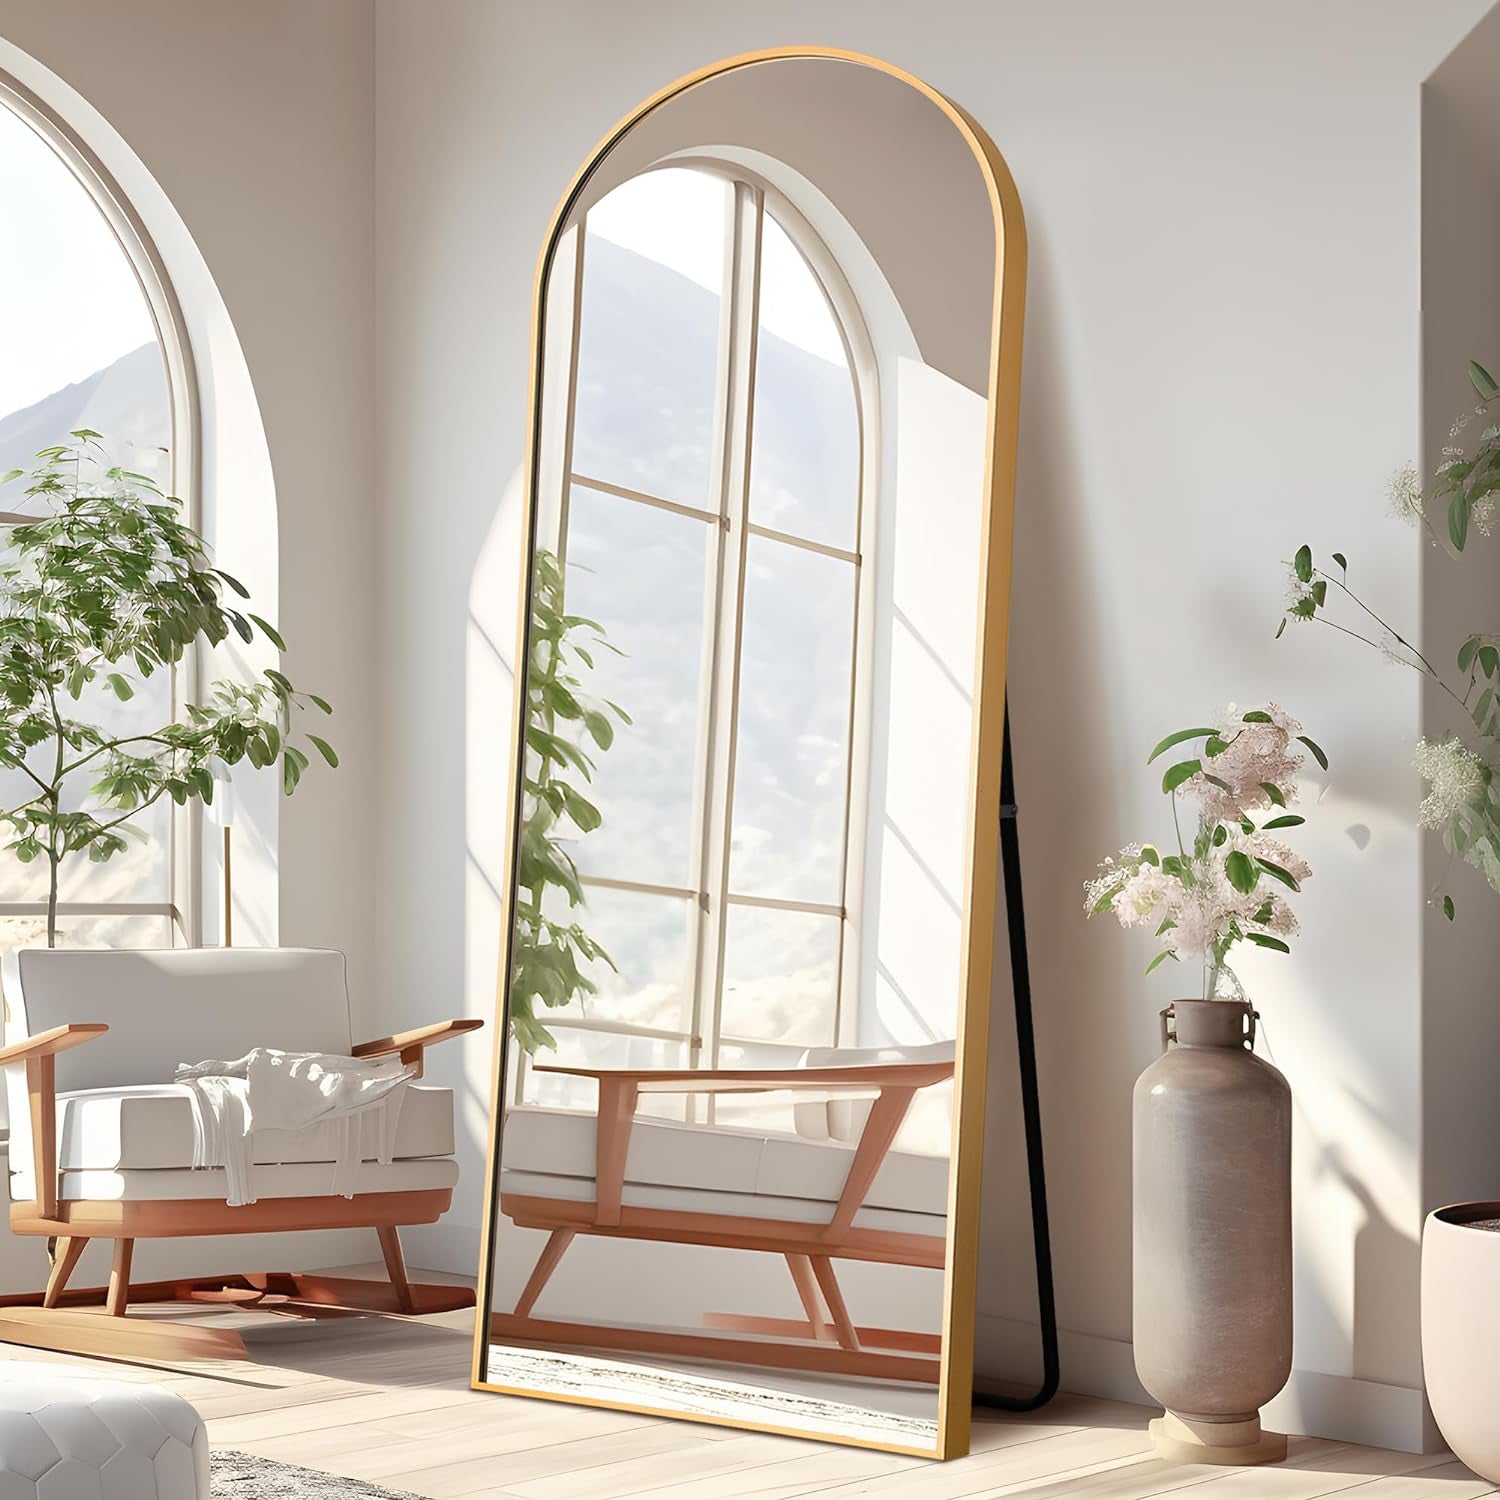 Arched Full Length Mirror Standing Hanging or Leaning against Wall, Oversized Large Bedroom Mirror Floor Mirror Dressing Mirror, Aluminum Alloy Thin Frame, Gold, 65"X22"